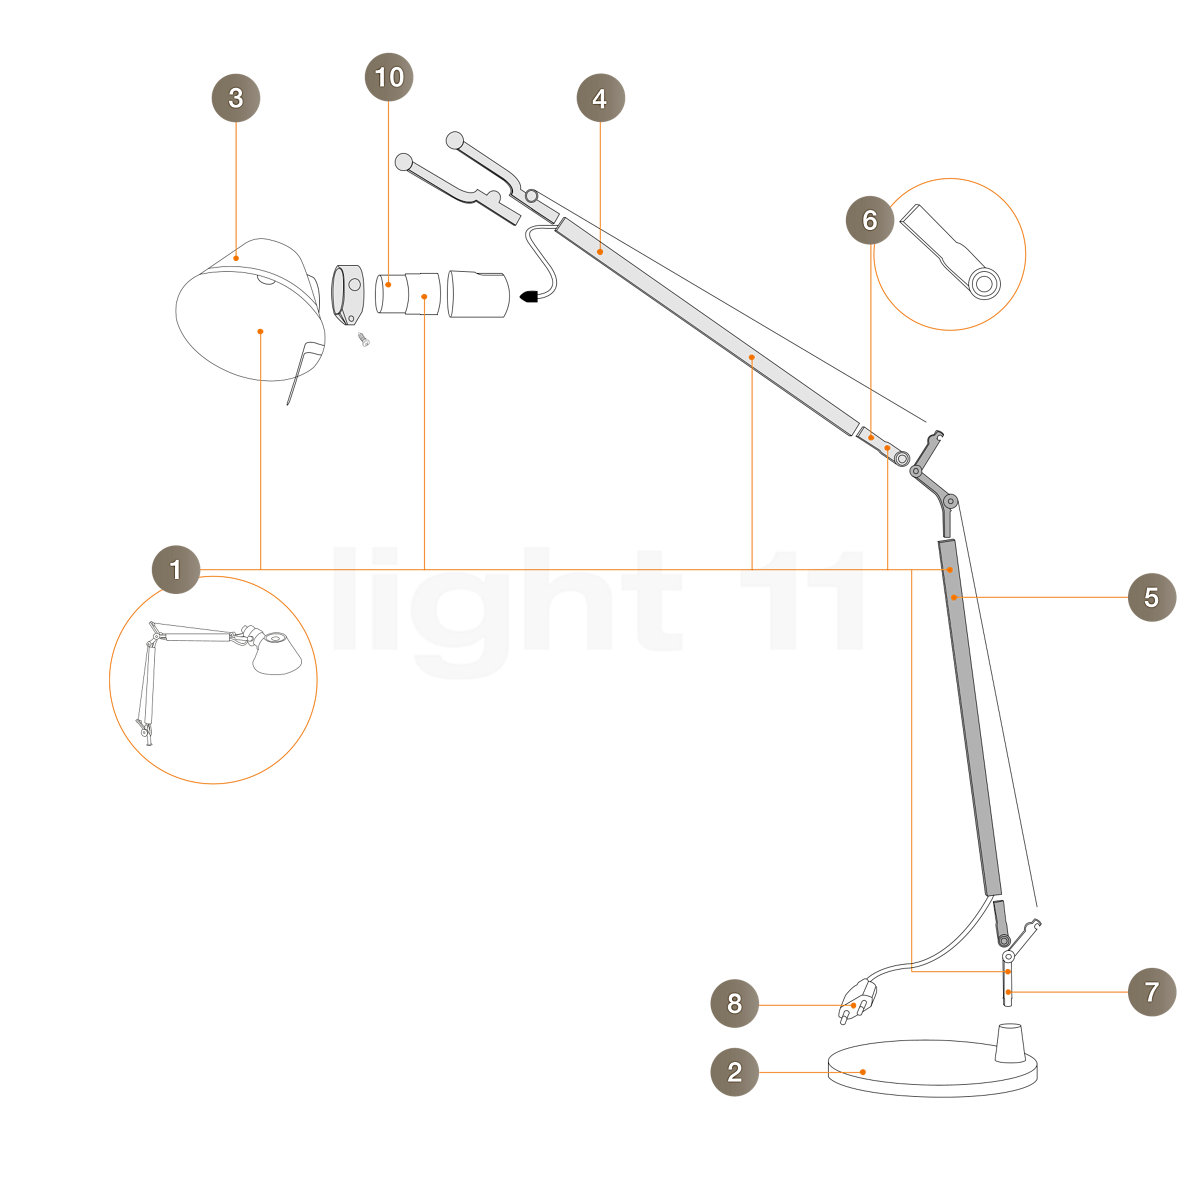 werper milieu Bestrating Buy Artemide Spare Parts for Tolomeo Micro at light11.eu